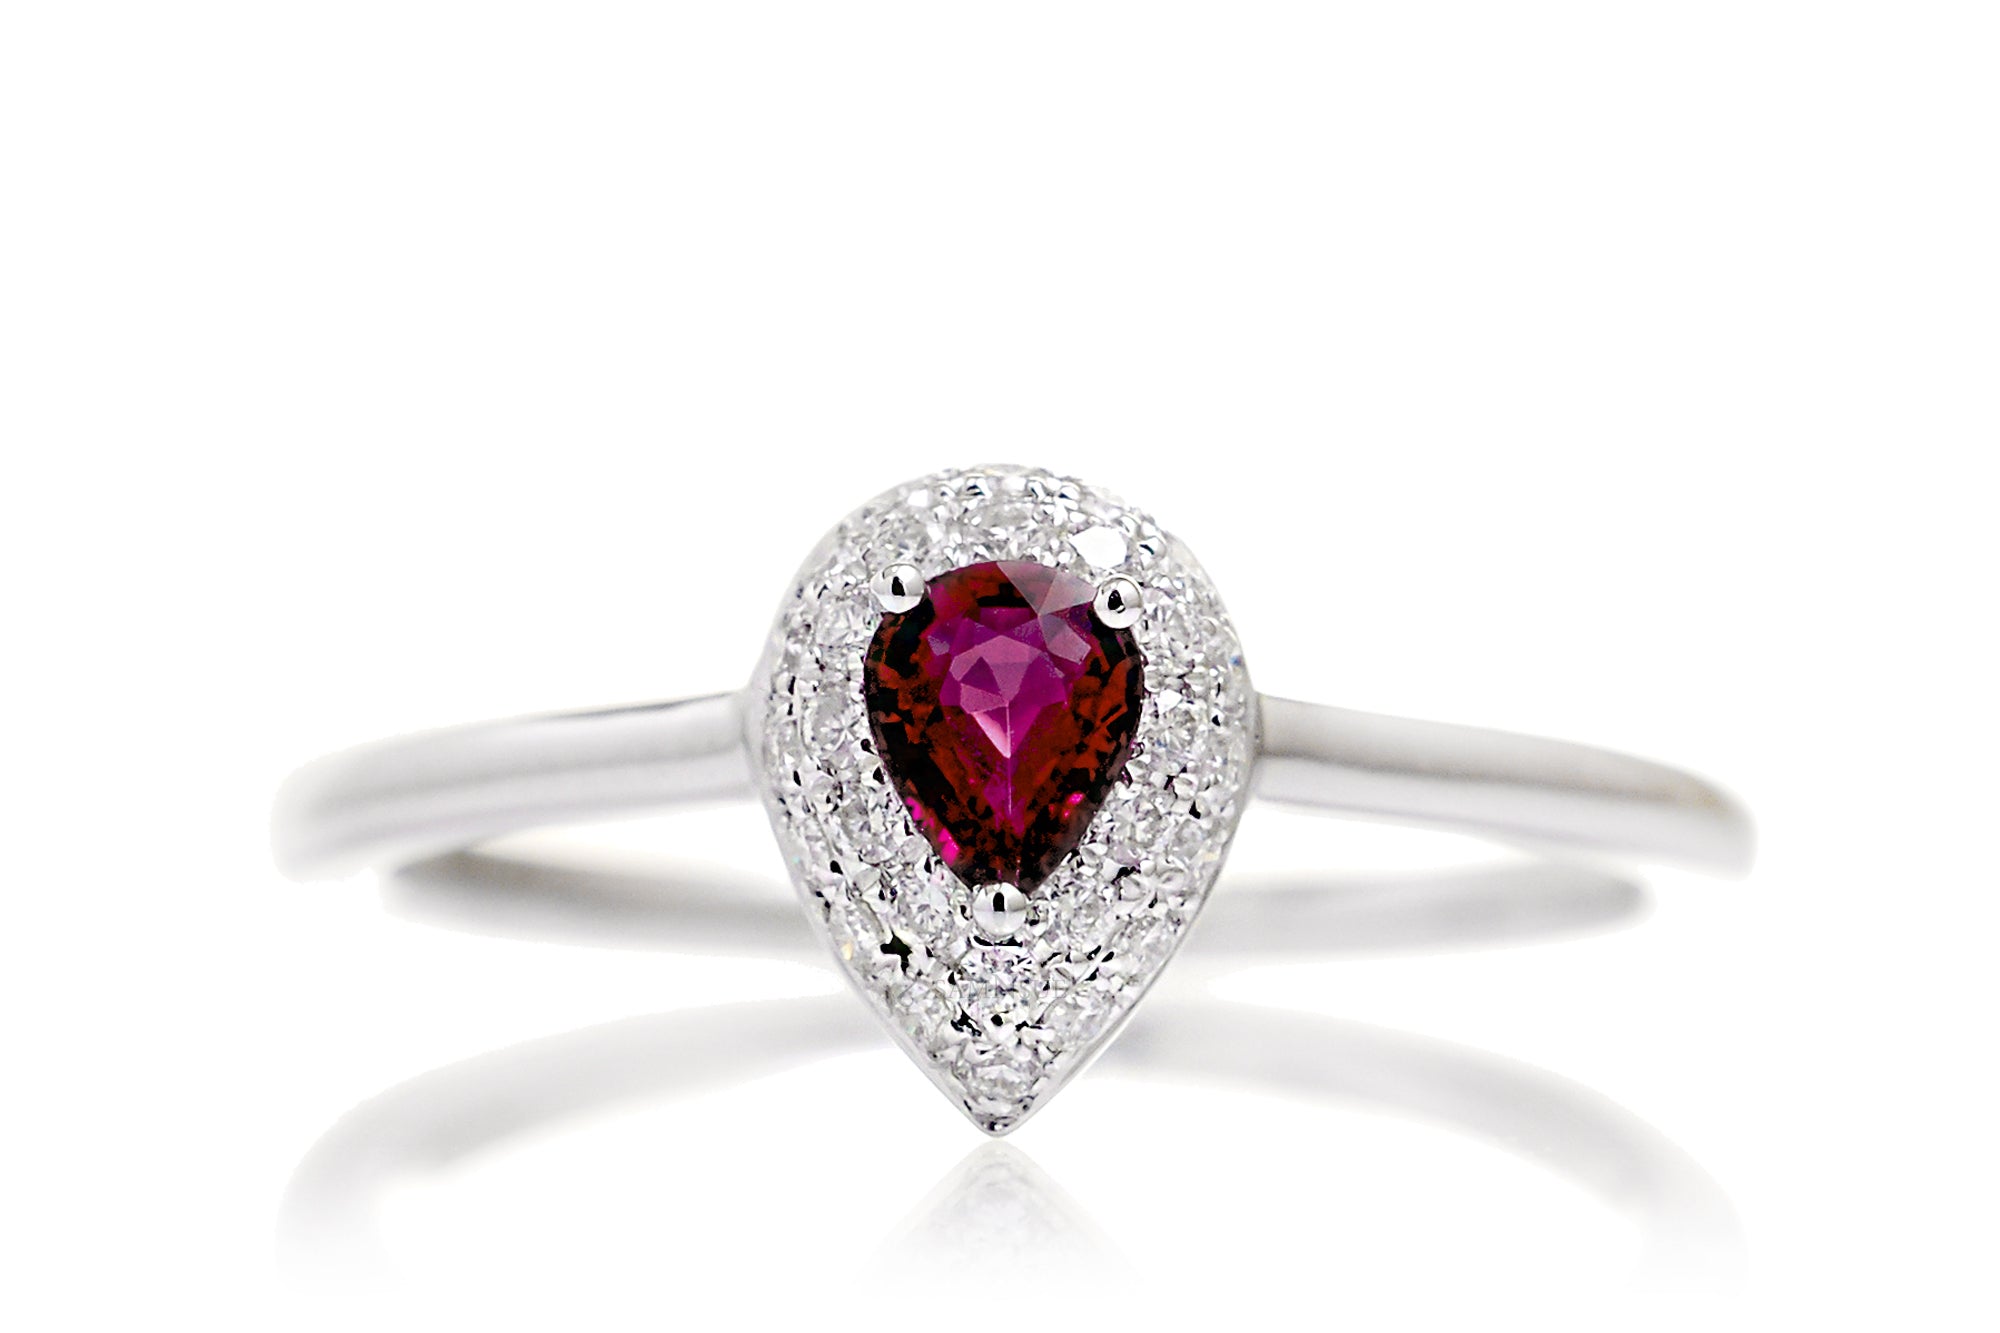 The Ophelia Pear Ruby Diamond Pave Halo Ring